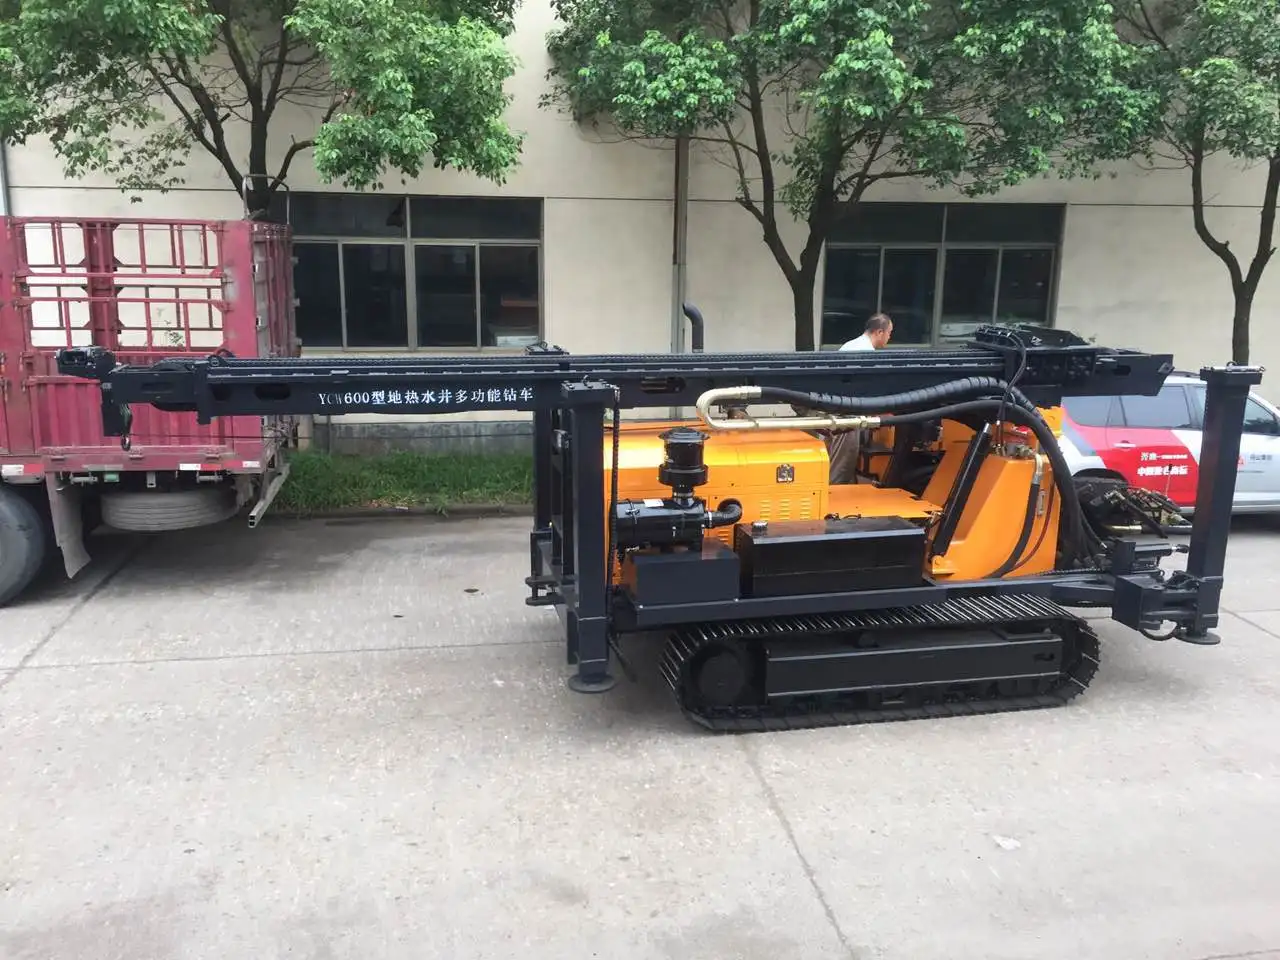 KW600 450m Depth Hole 168-350mm truck mounted Portable Crawler water well drilling rig machine